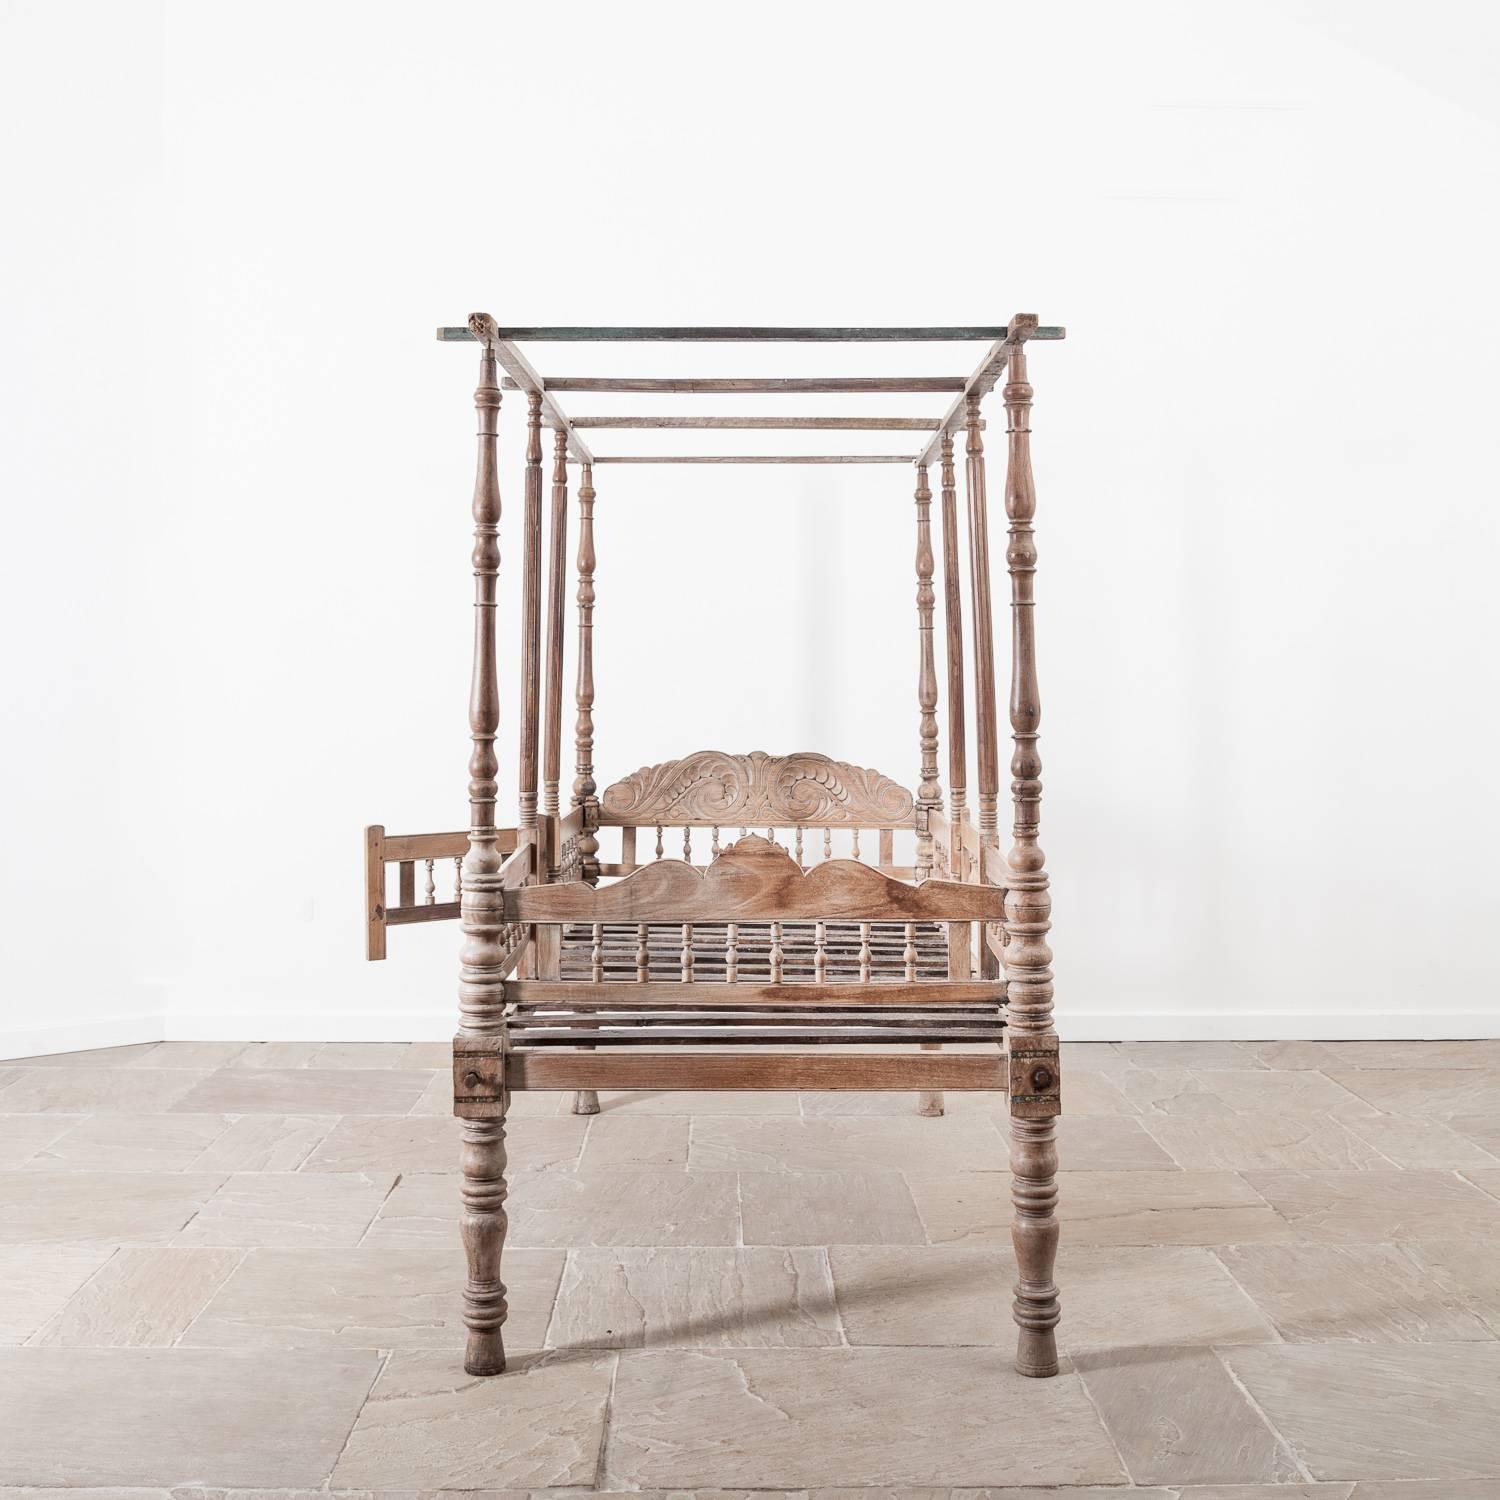 Indian 19th Century Rosewood and Teak Bed from Western Rajasthan, India